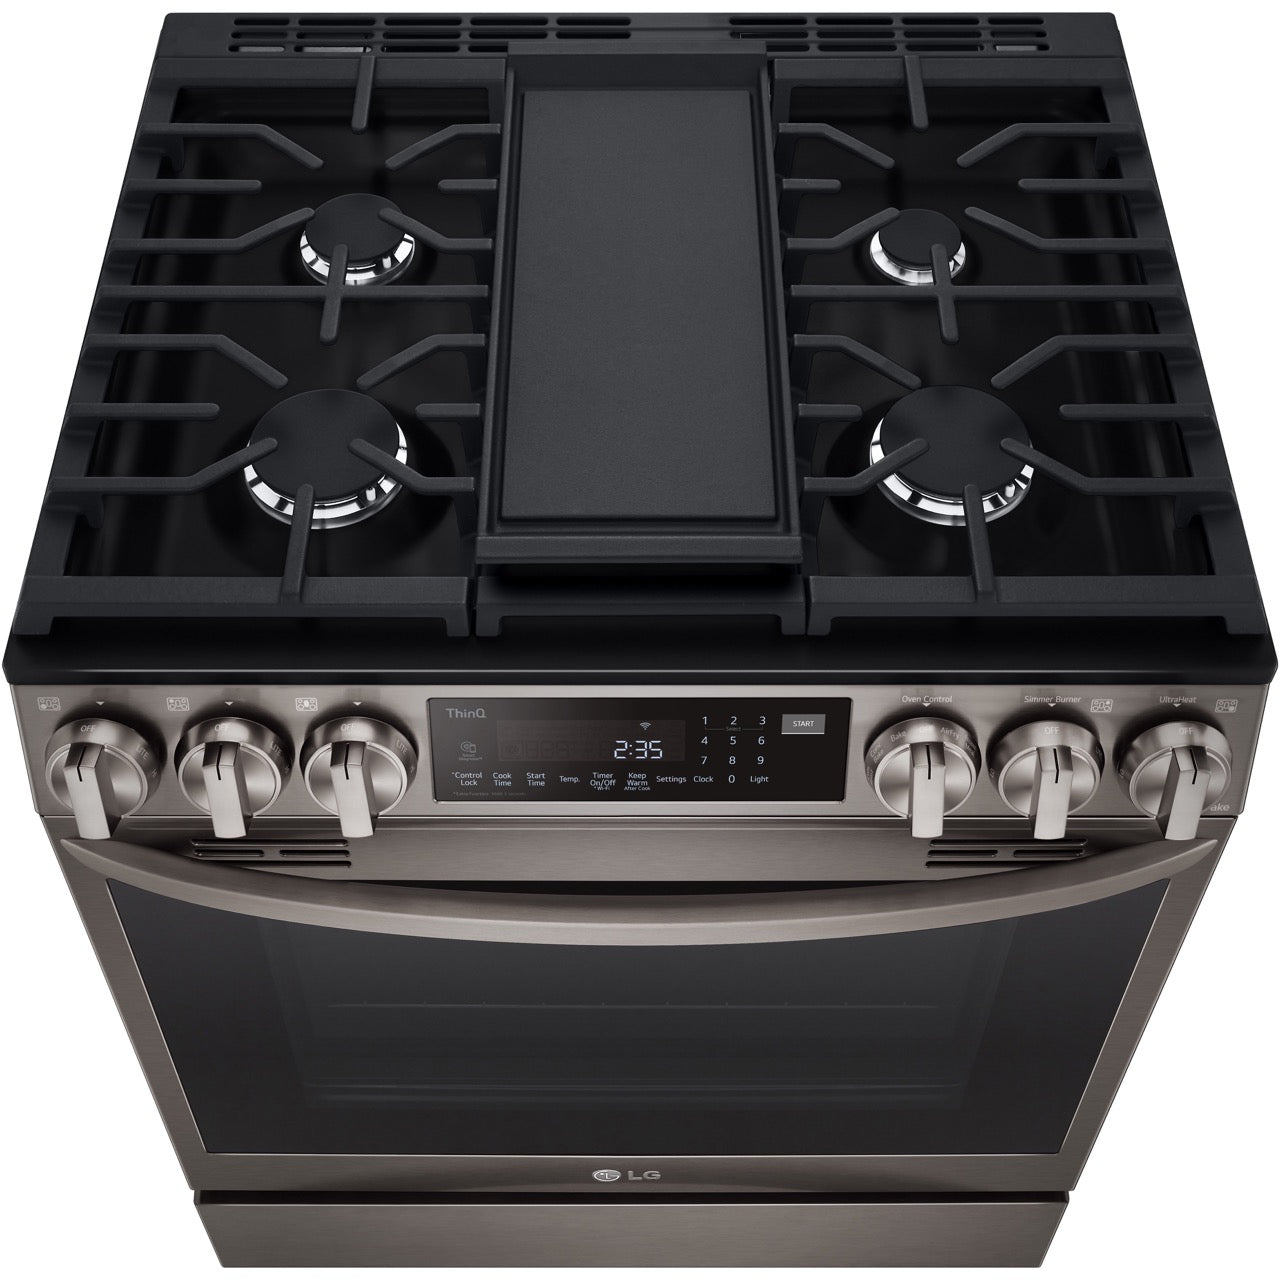 LG 6.3-Cu. Ft. Smart Wi-Fi Enabled ProBake Convection InstaView Gas Slide-in Range with Air Fry, Black Stainless Steel (LSGL6335D)